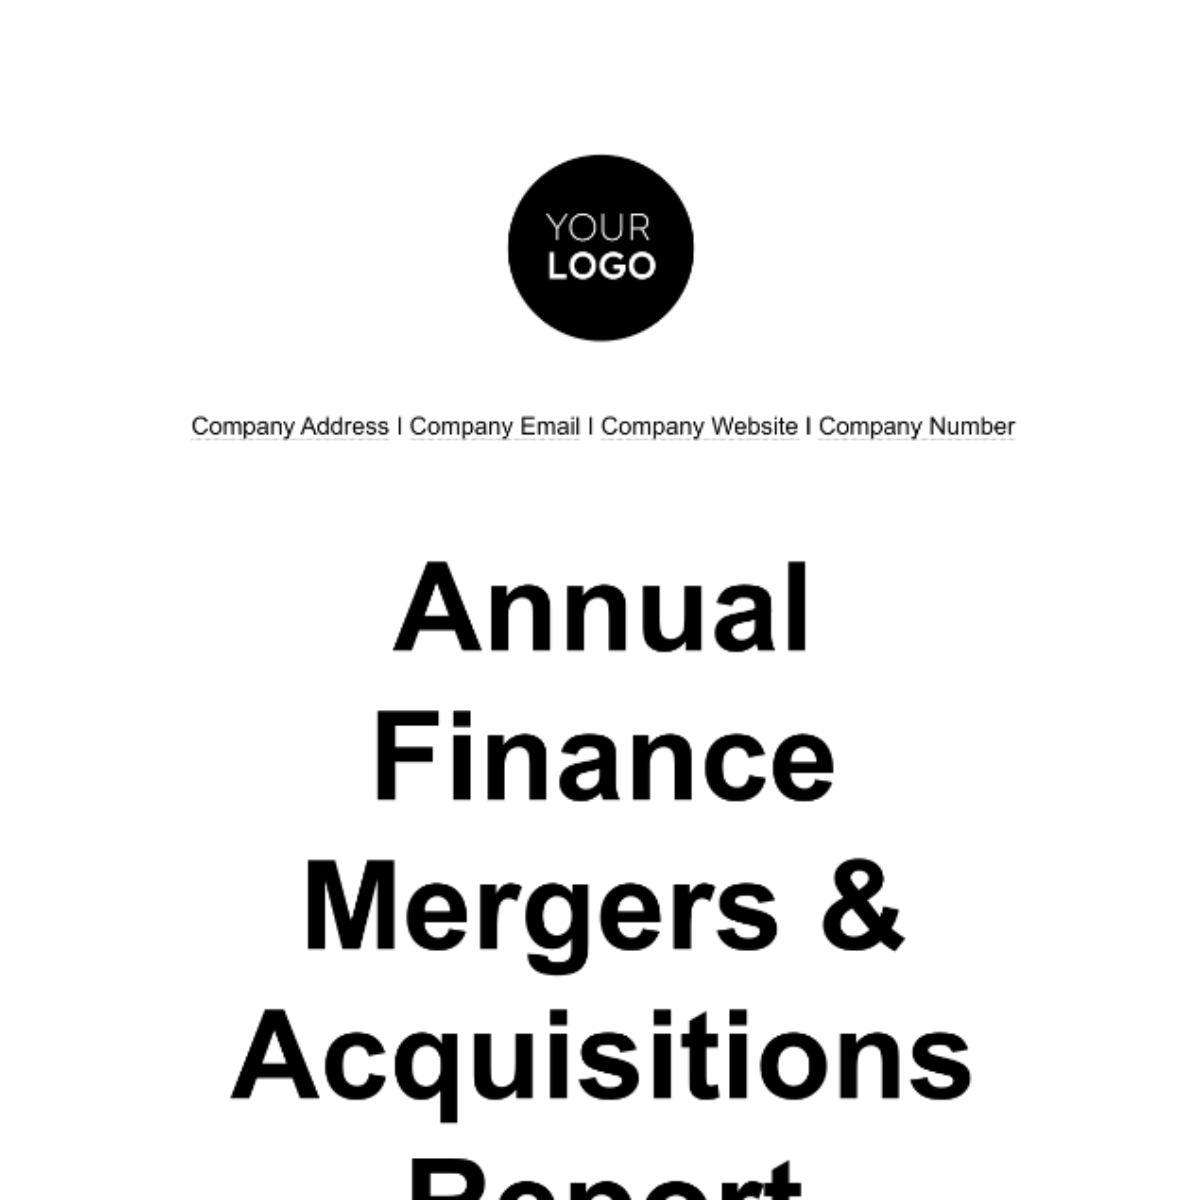 Annual Finance Mergers & Acquisitions Report Template